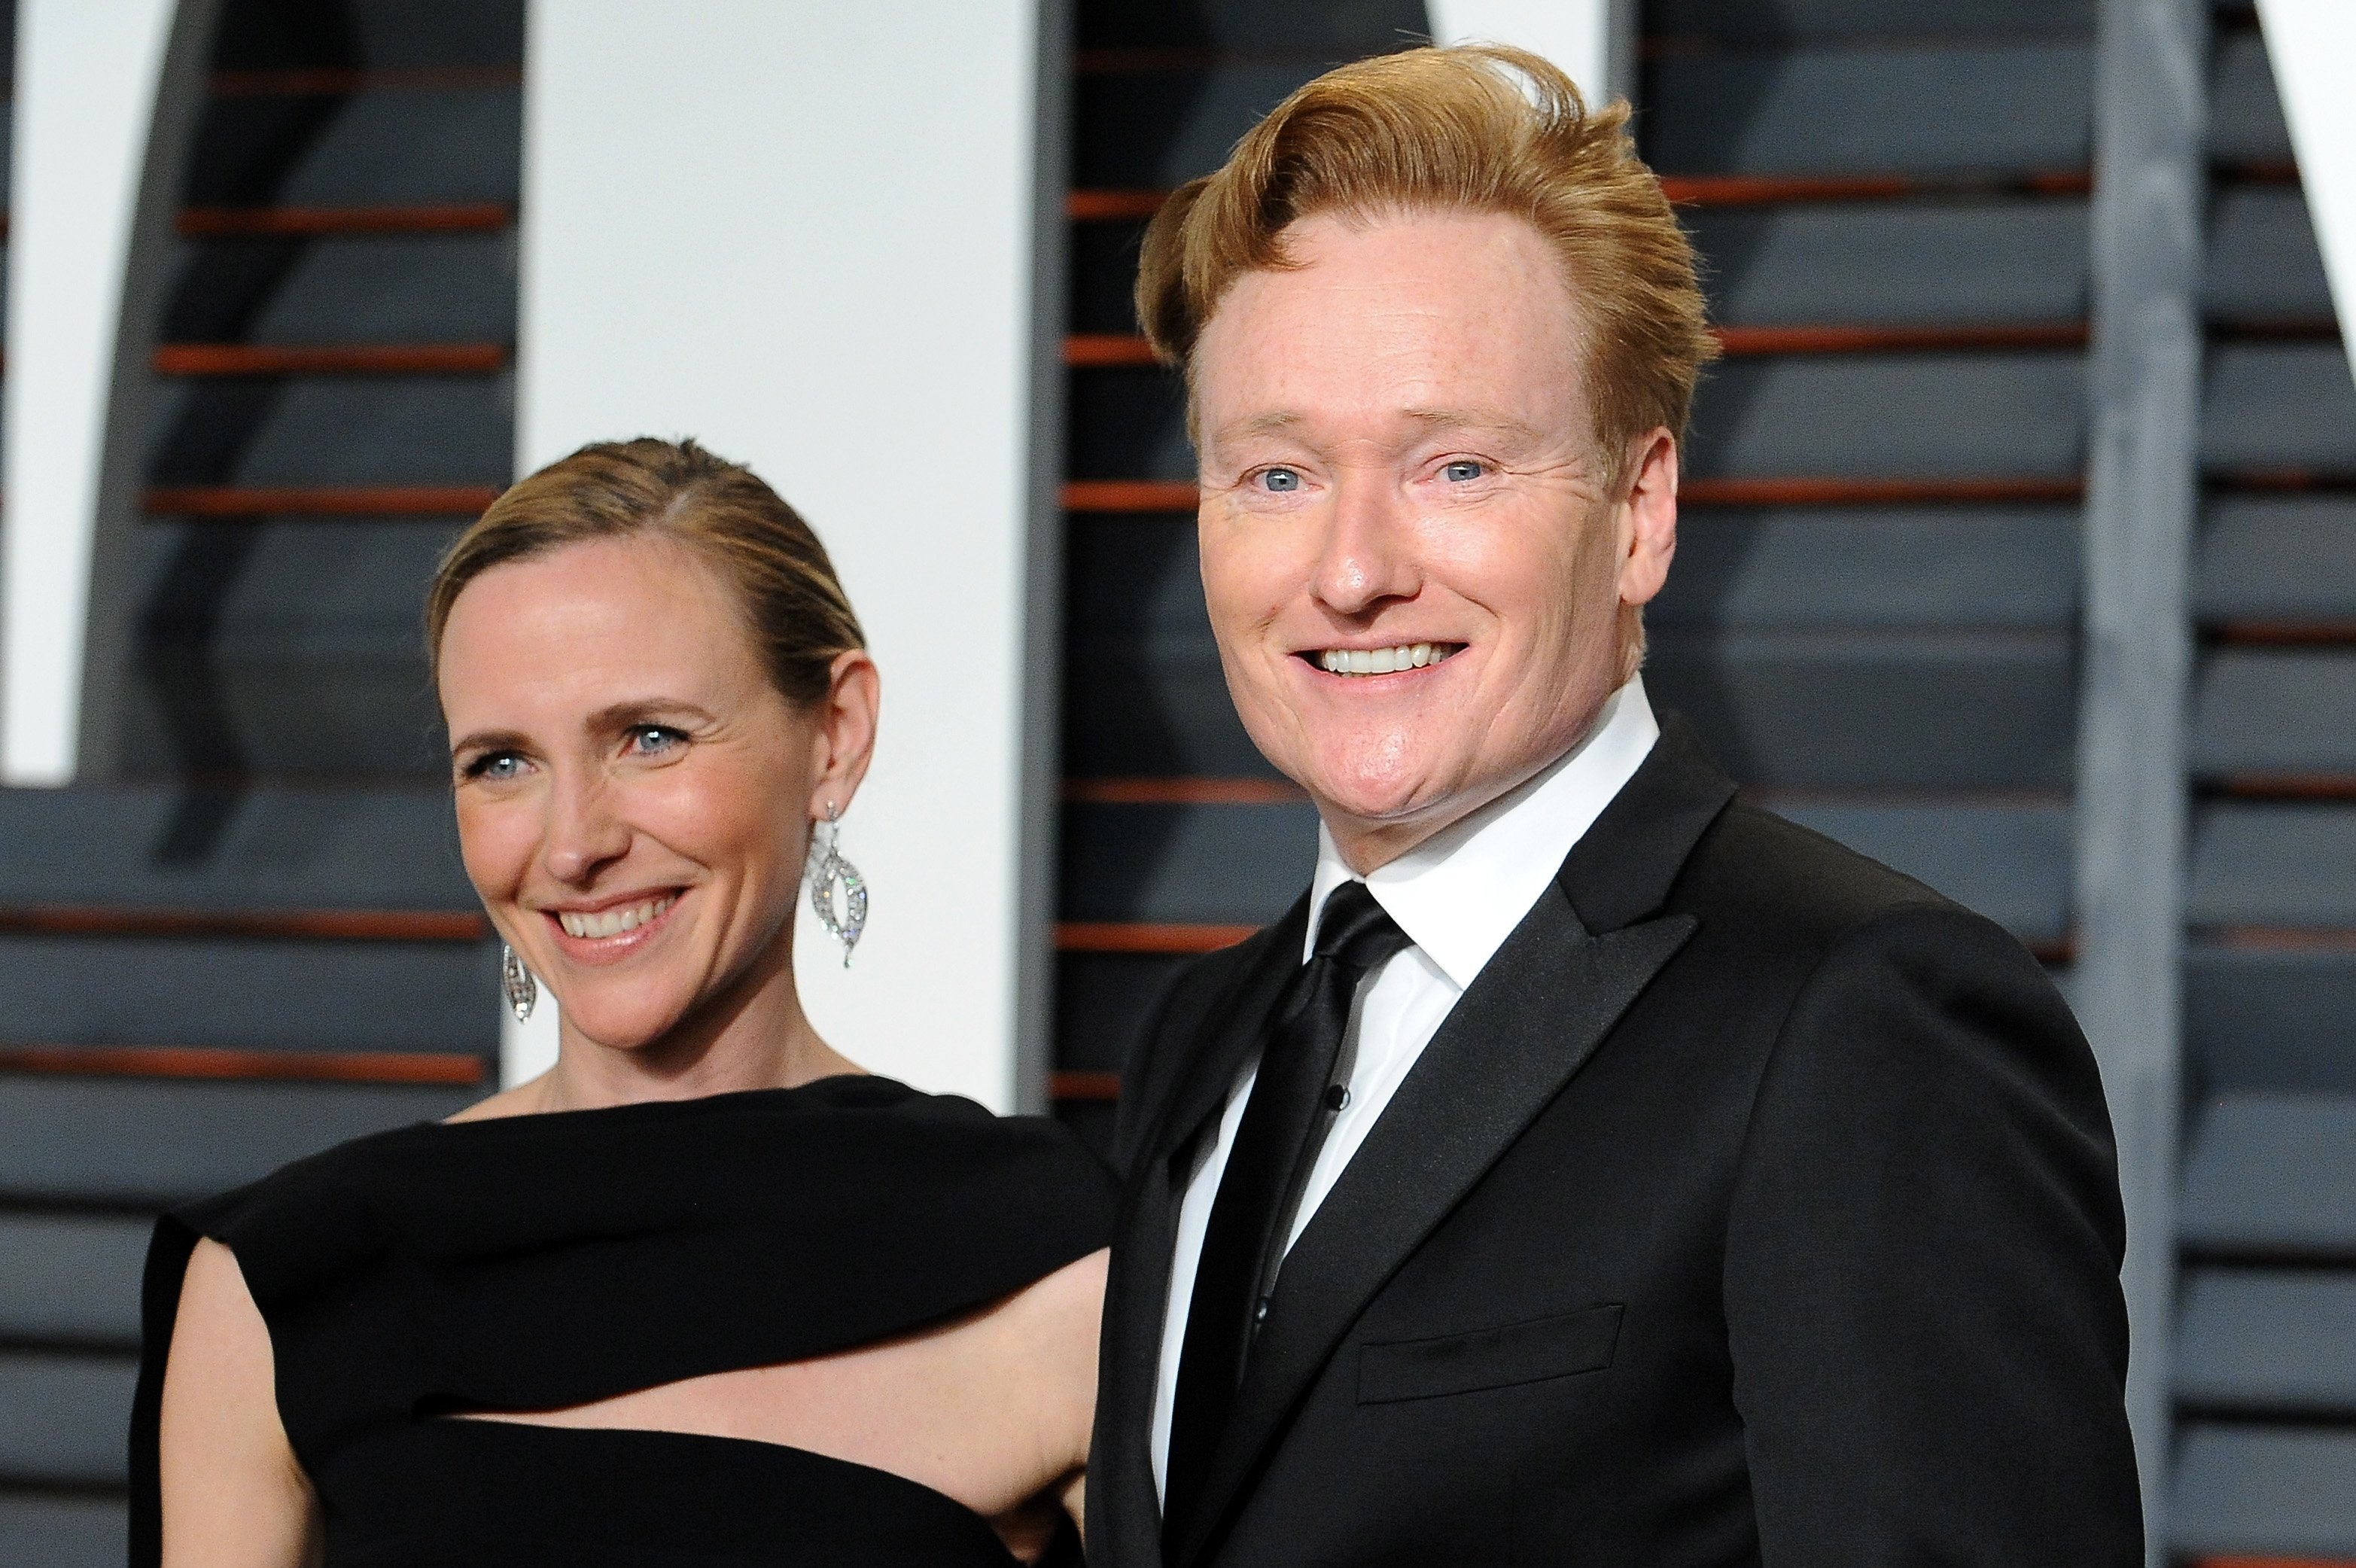 Liza Powel O'Brien and Conan O'Brien attend the 2015 Vanity Fair Oscar Party hosted by Graydon Carter at Wallis Annenberg Center for the Performing Arts on February 22, 2015, in Beverly Hills, California. | Source: Getty Images